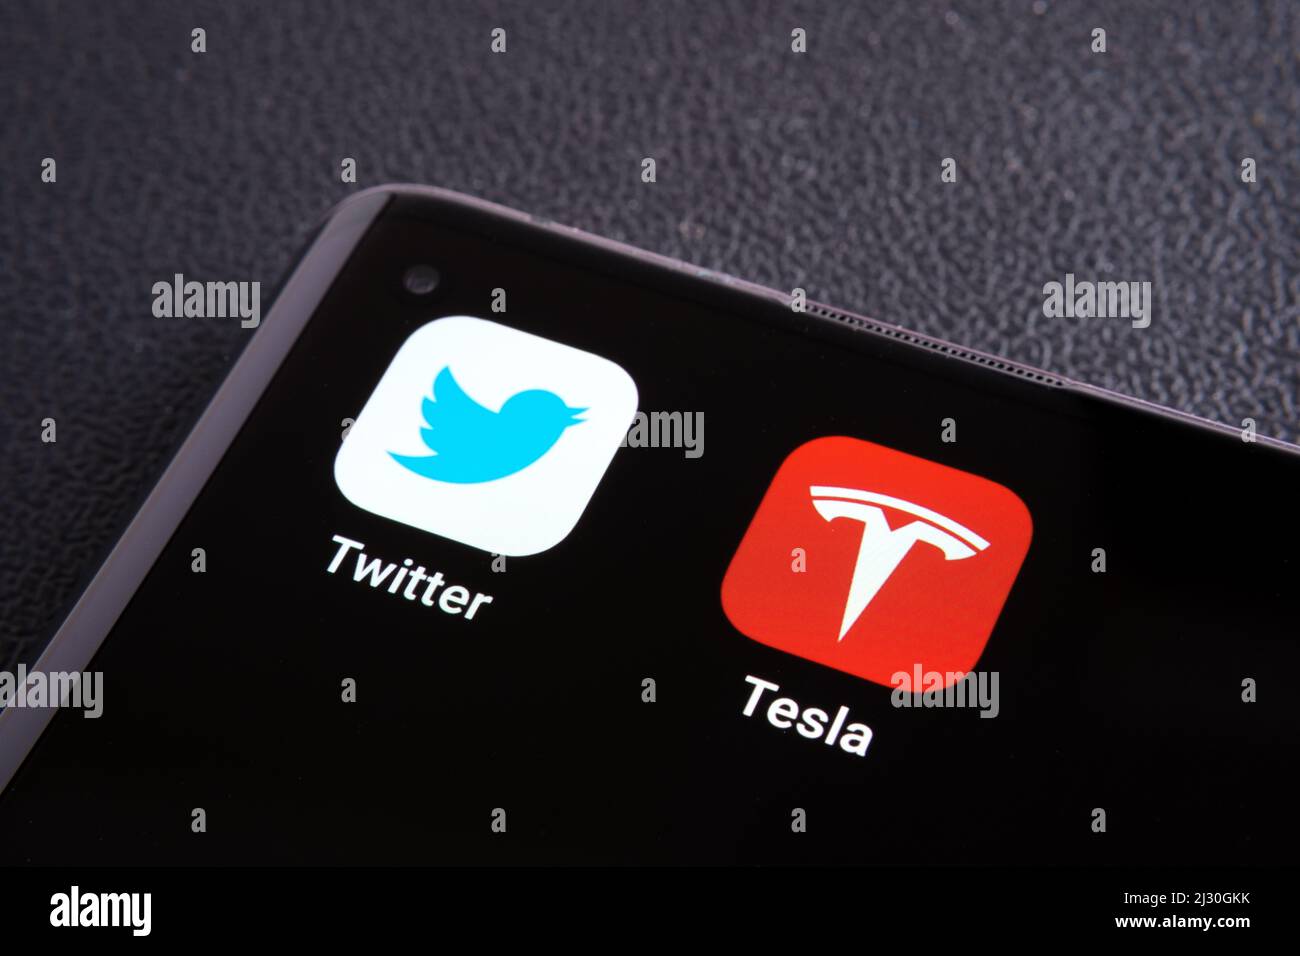 Twitter and Tesla apps seen on the corner of smartphone. Concept for Elon Musk buying shares of Twitter. Stafford, United Kingdom, March 4, 2022. Stock Photo